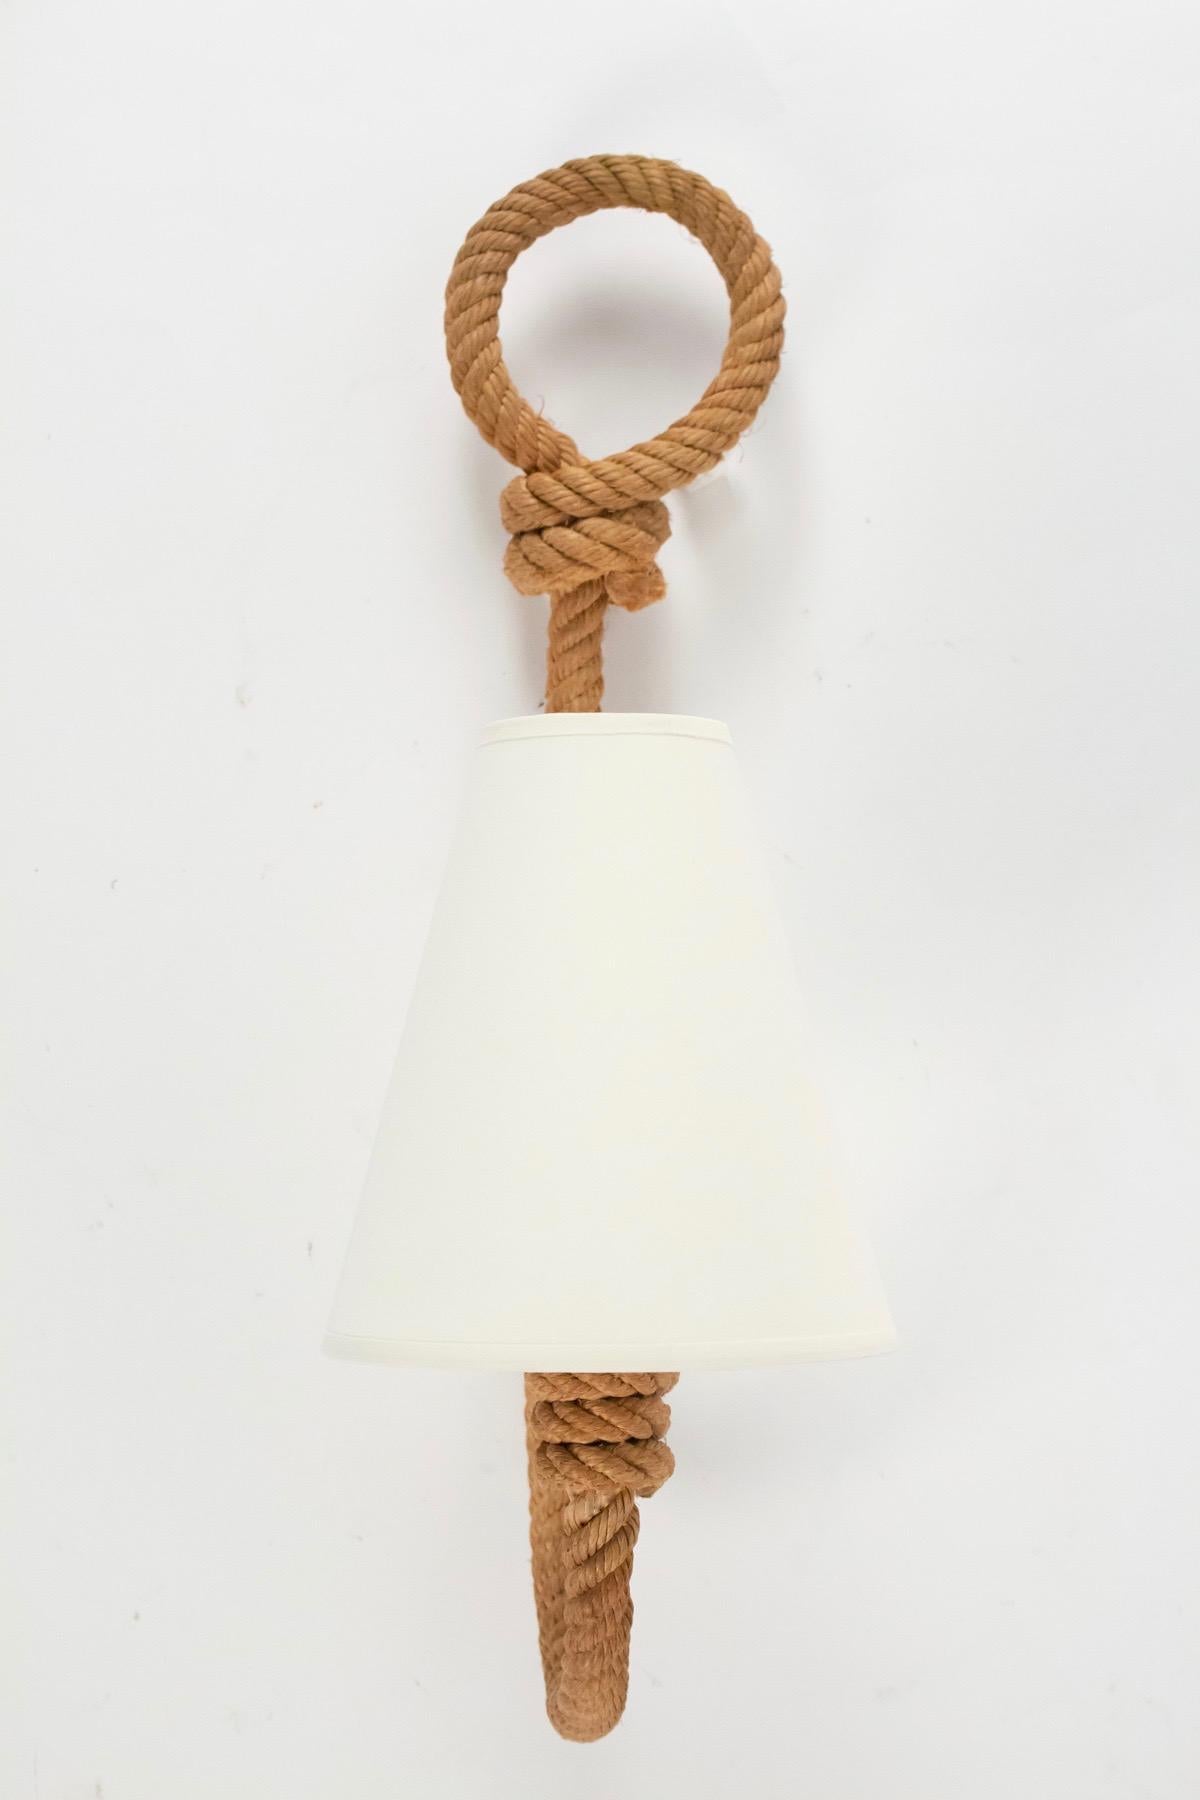 The arms are made of weaved rope ended by a large buckle.
Handmade lampshade in white ivory cotton. 
One bulb per sconce.

Adrien Audoux and Frida Minet are known for their lights and furniture made of rope.
Their first workshop have been